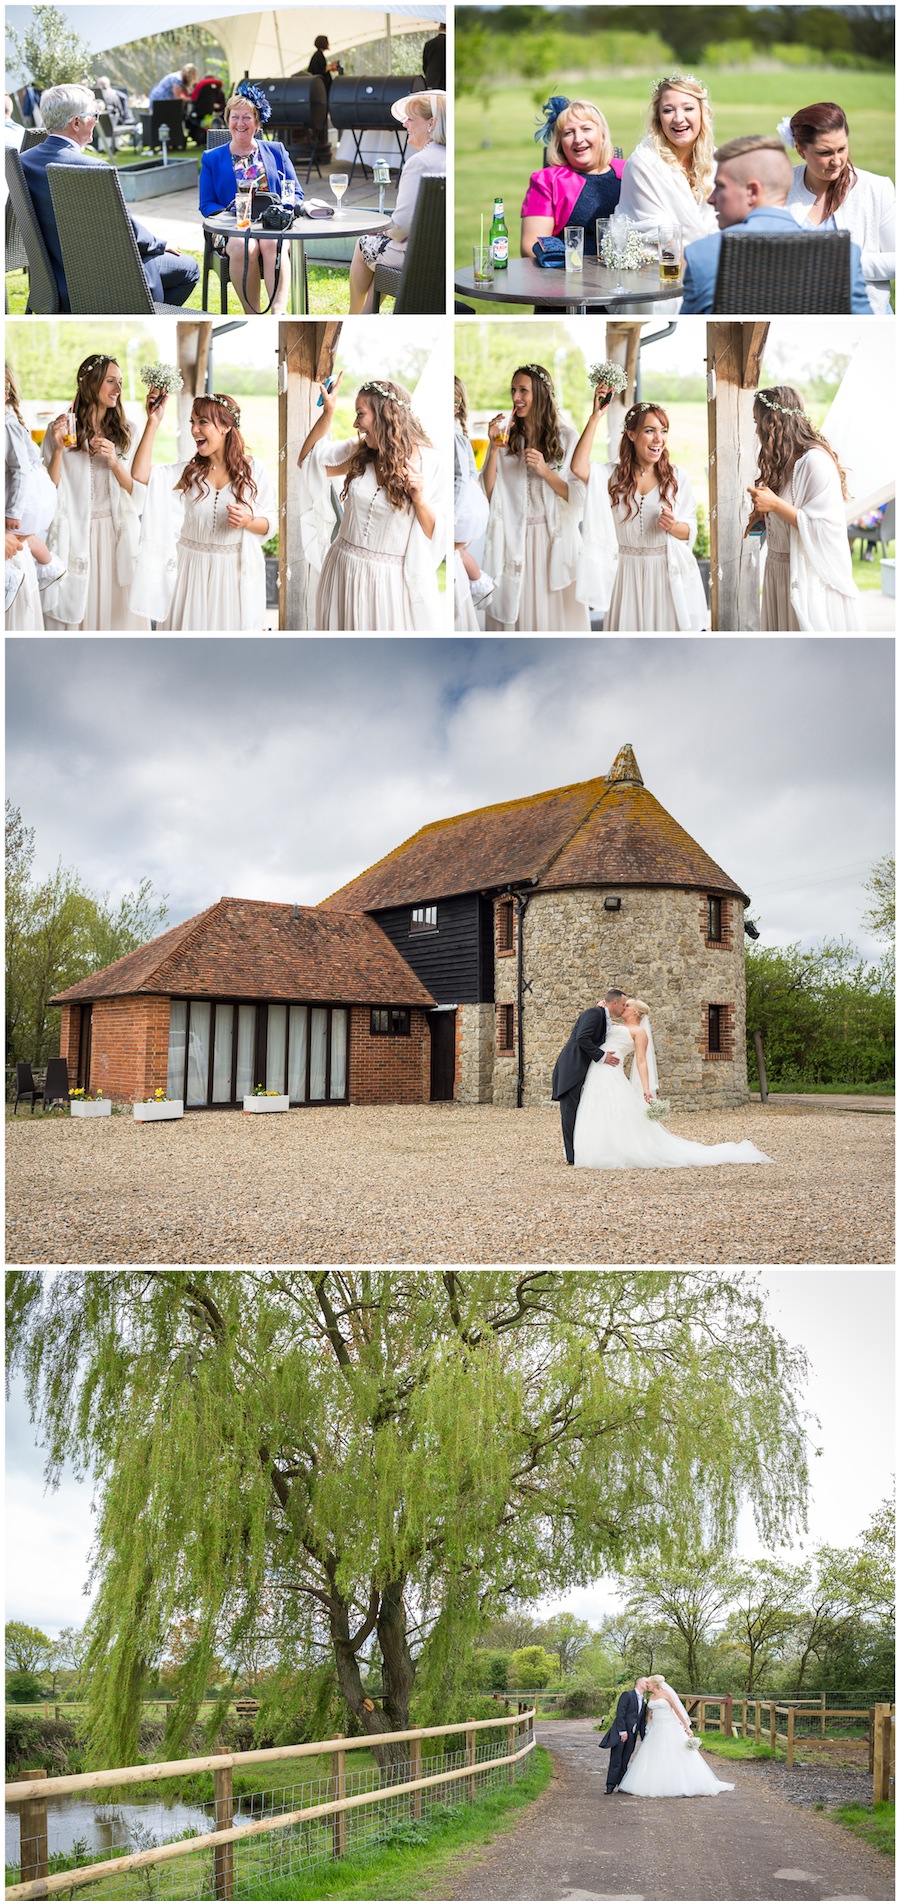 Frasers, Coldharbour Farm wedding photography